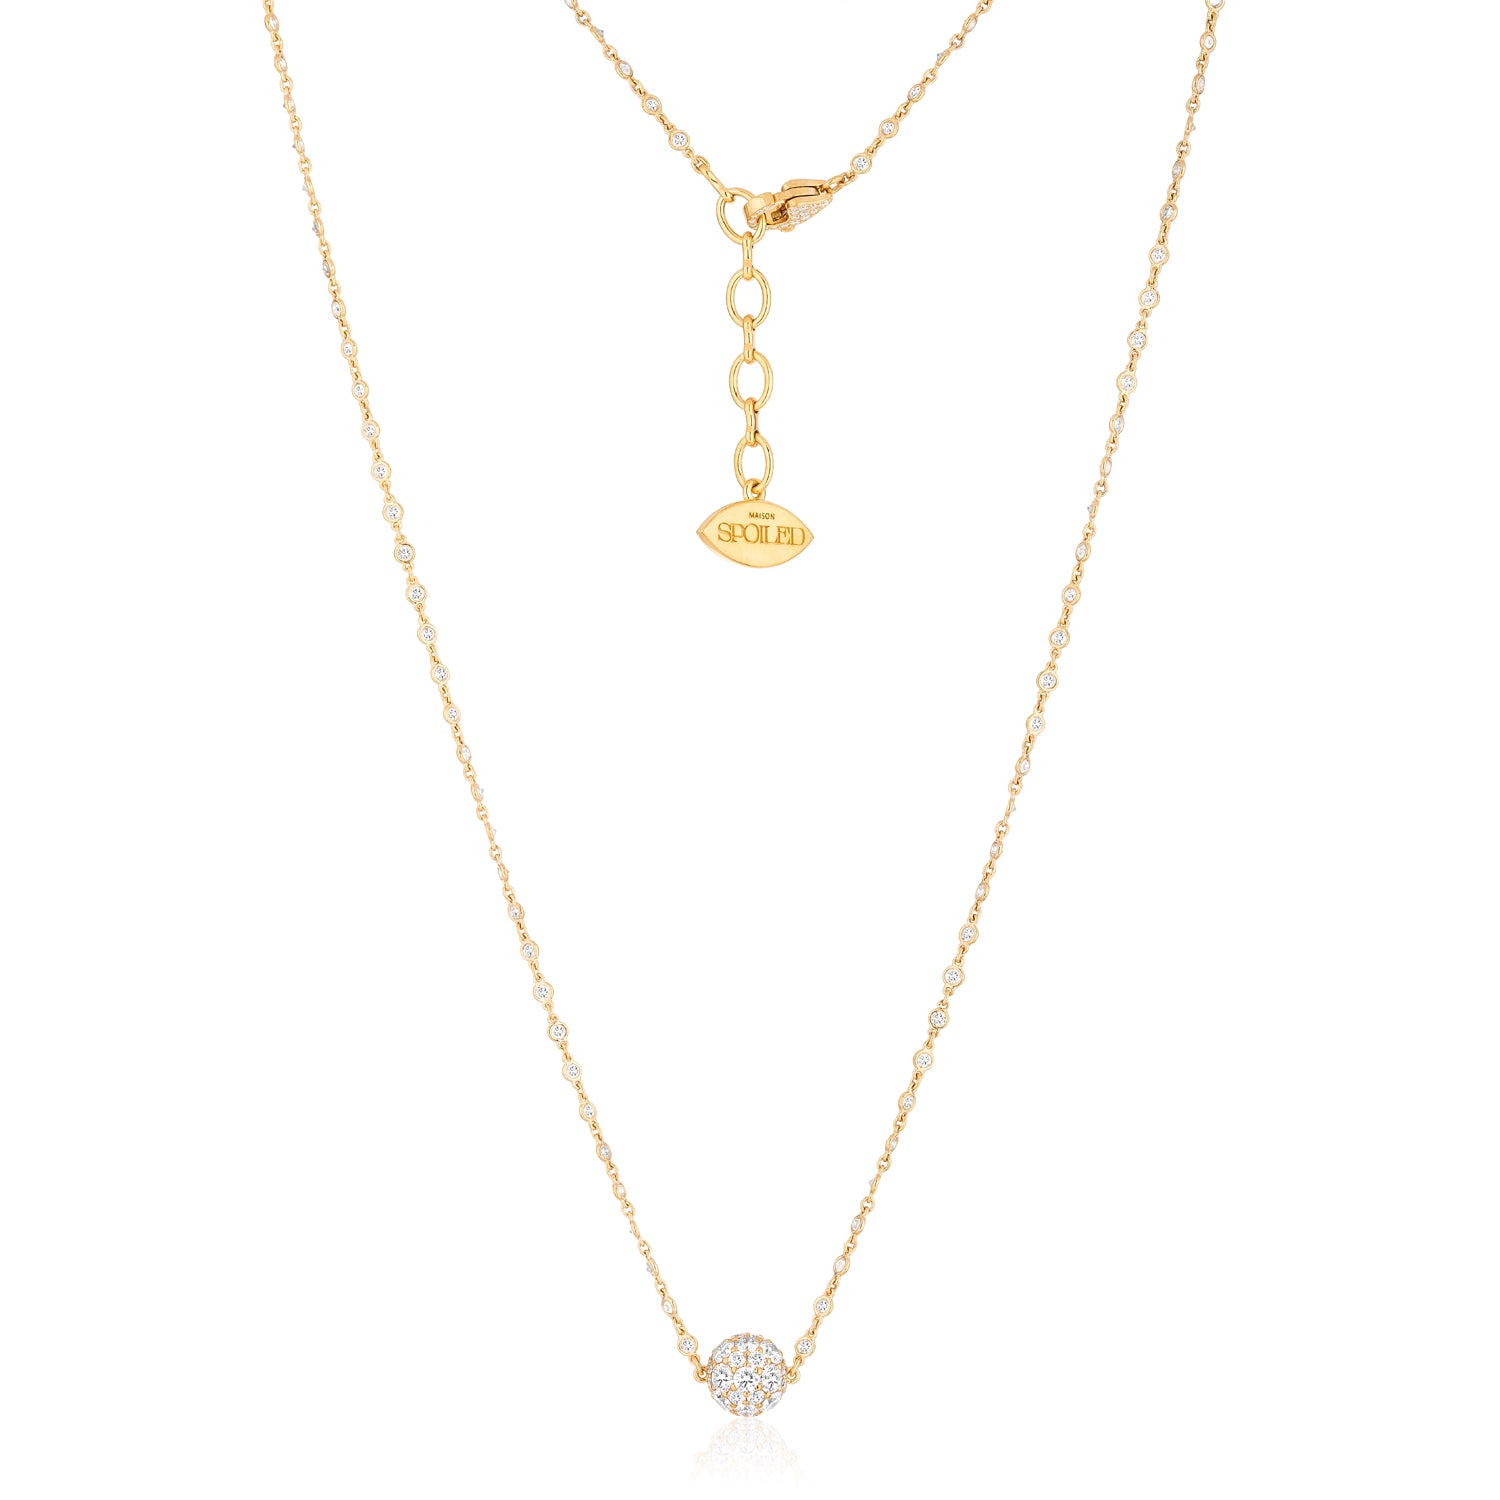 Celestial Single Charm Pendant Spoiled Chain in Yellow Gold